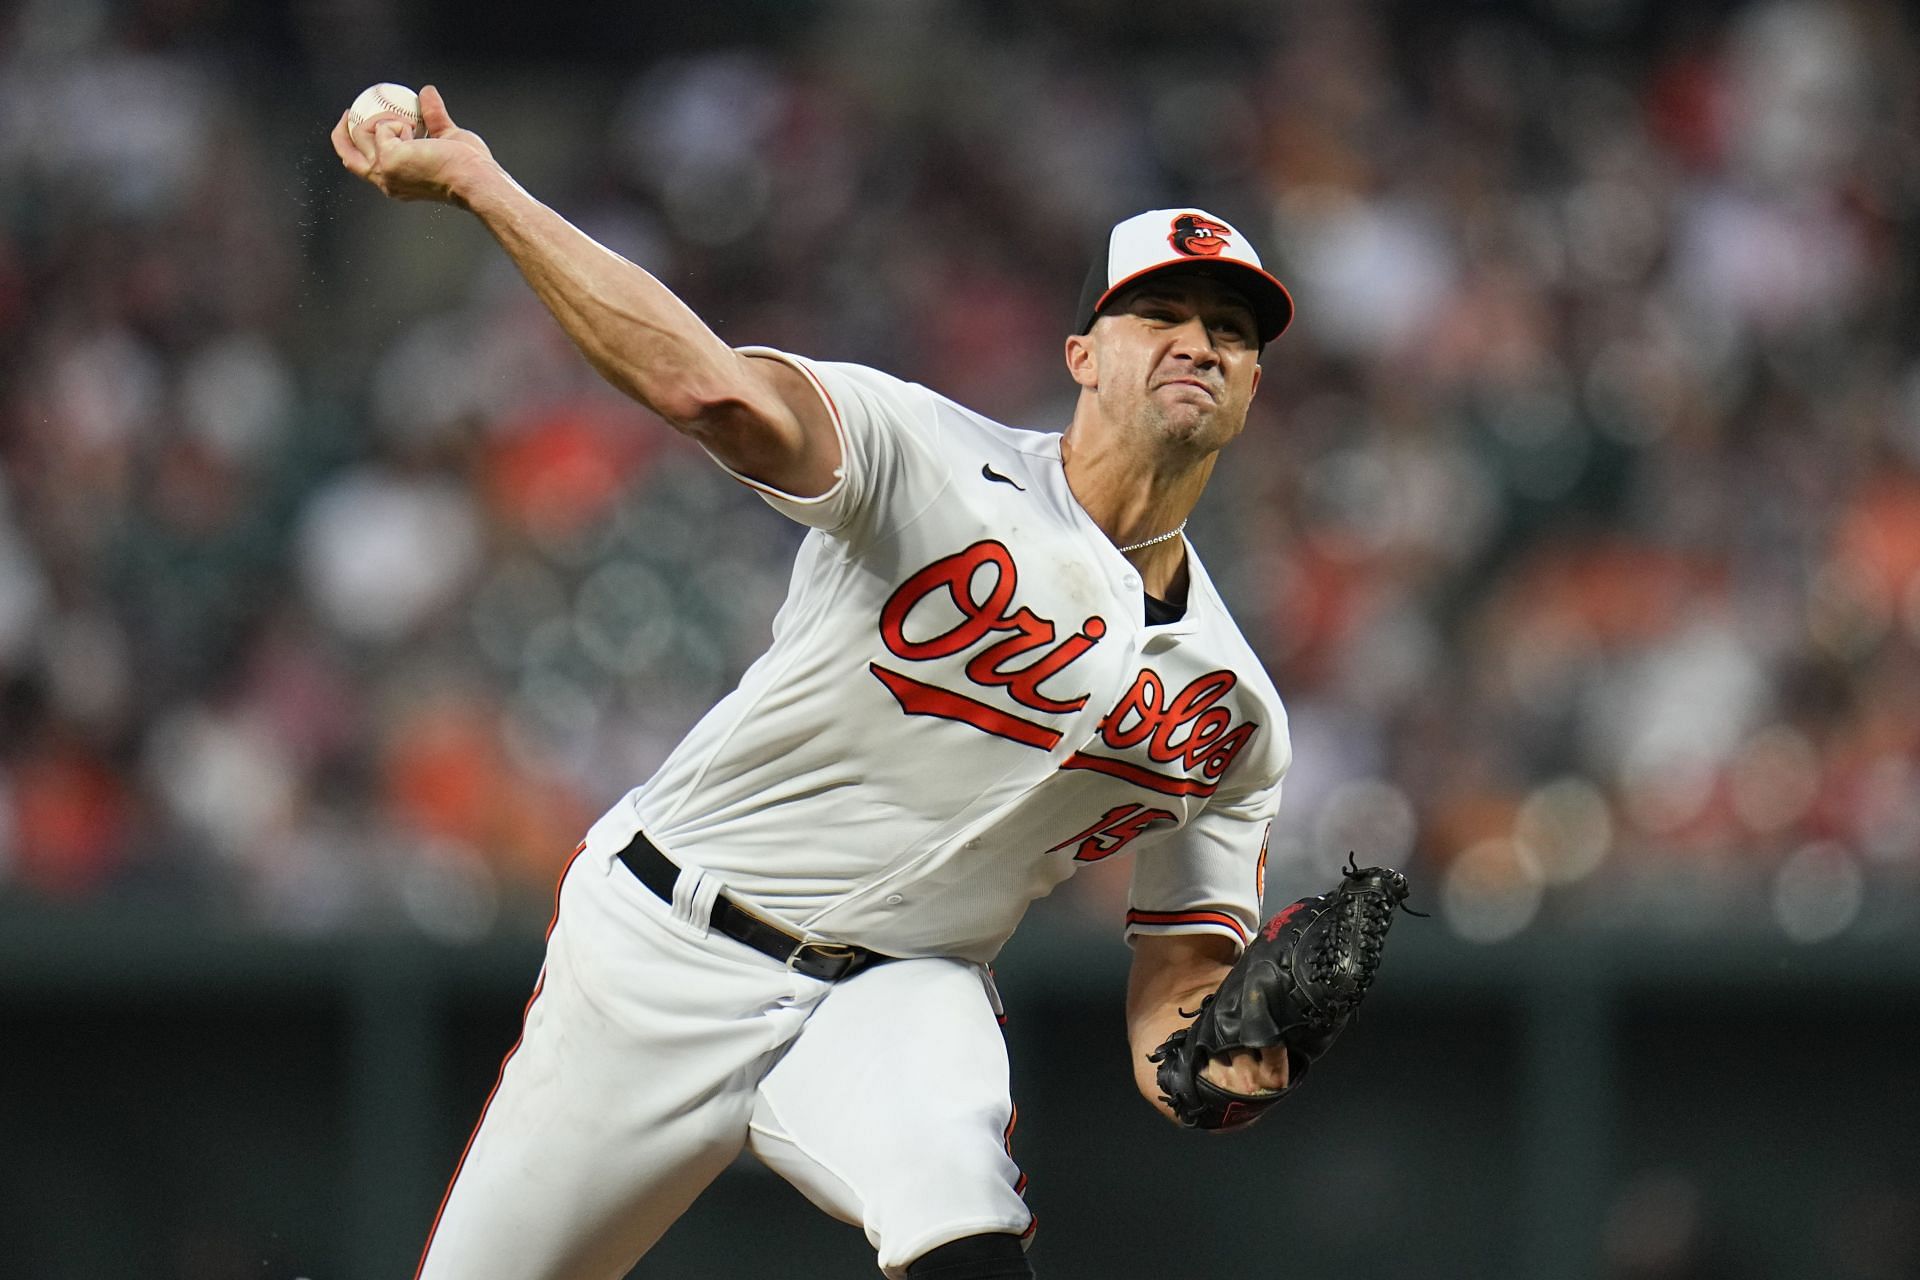 Baltimore Orioles starting pitcher Jack Flaherty throws against the Houston Astros in the third inning in Baltimore